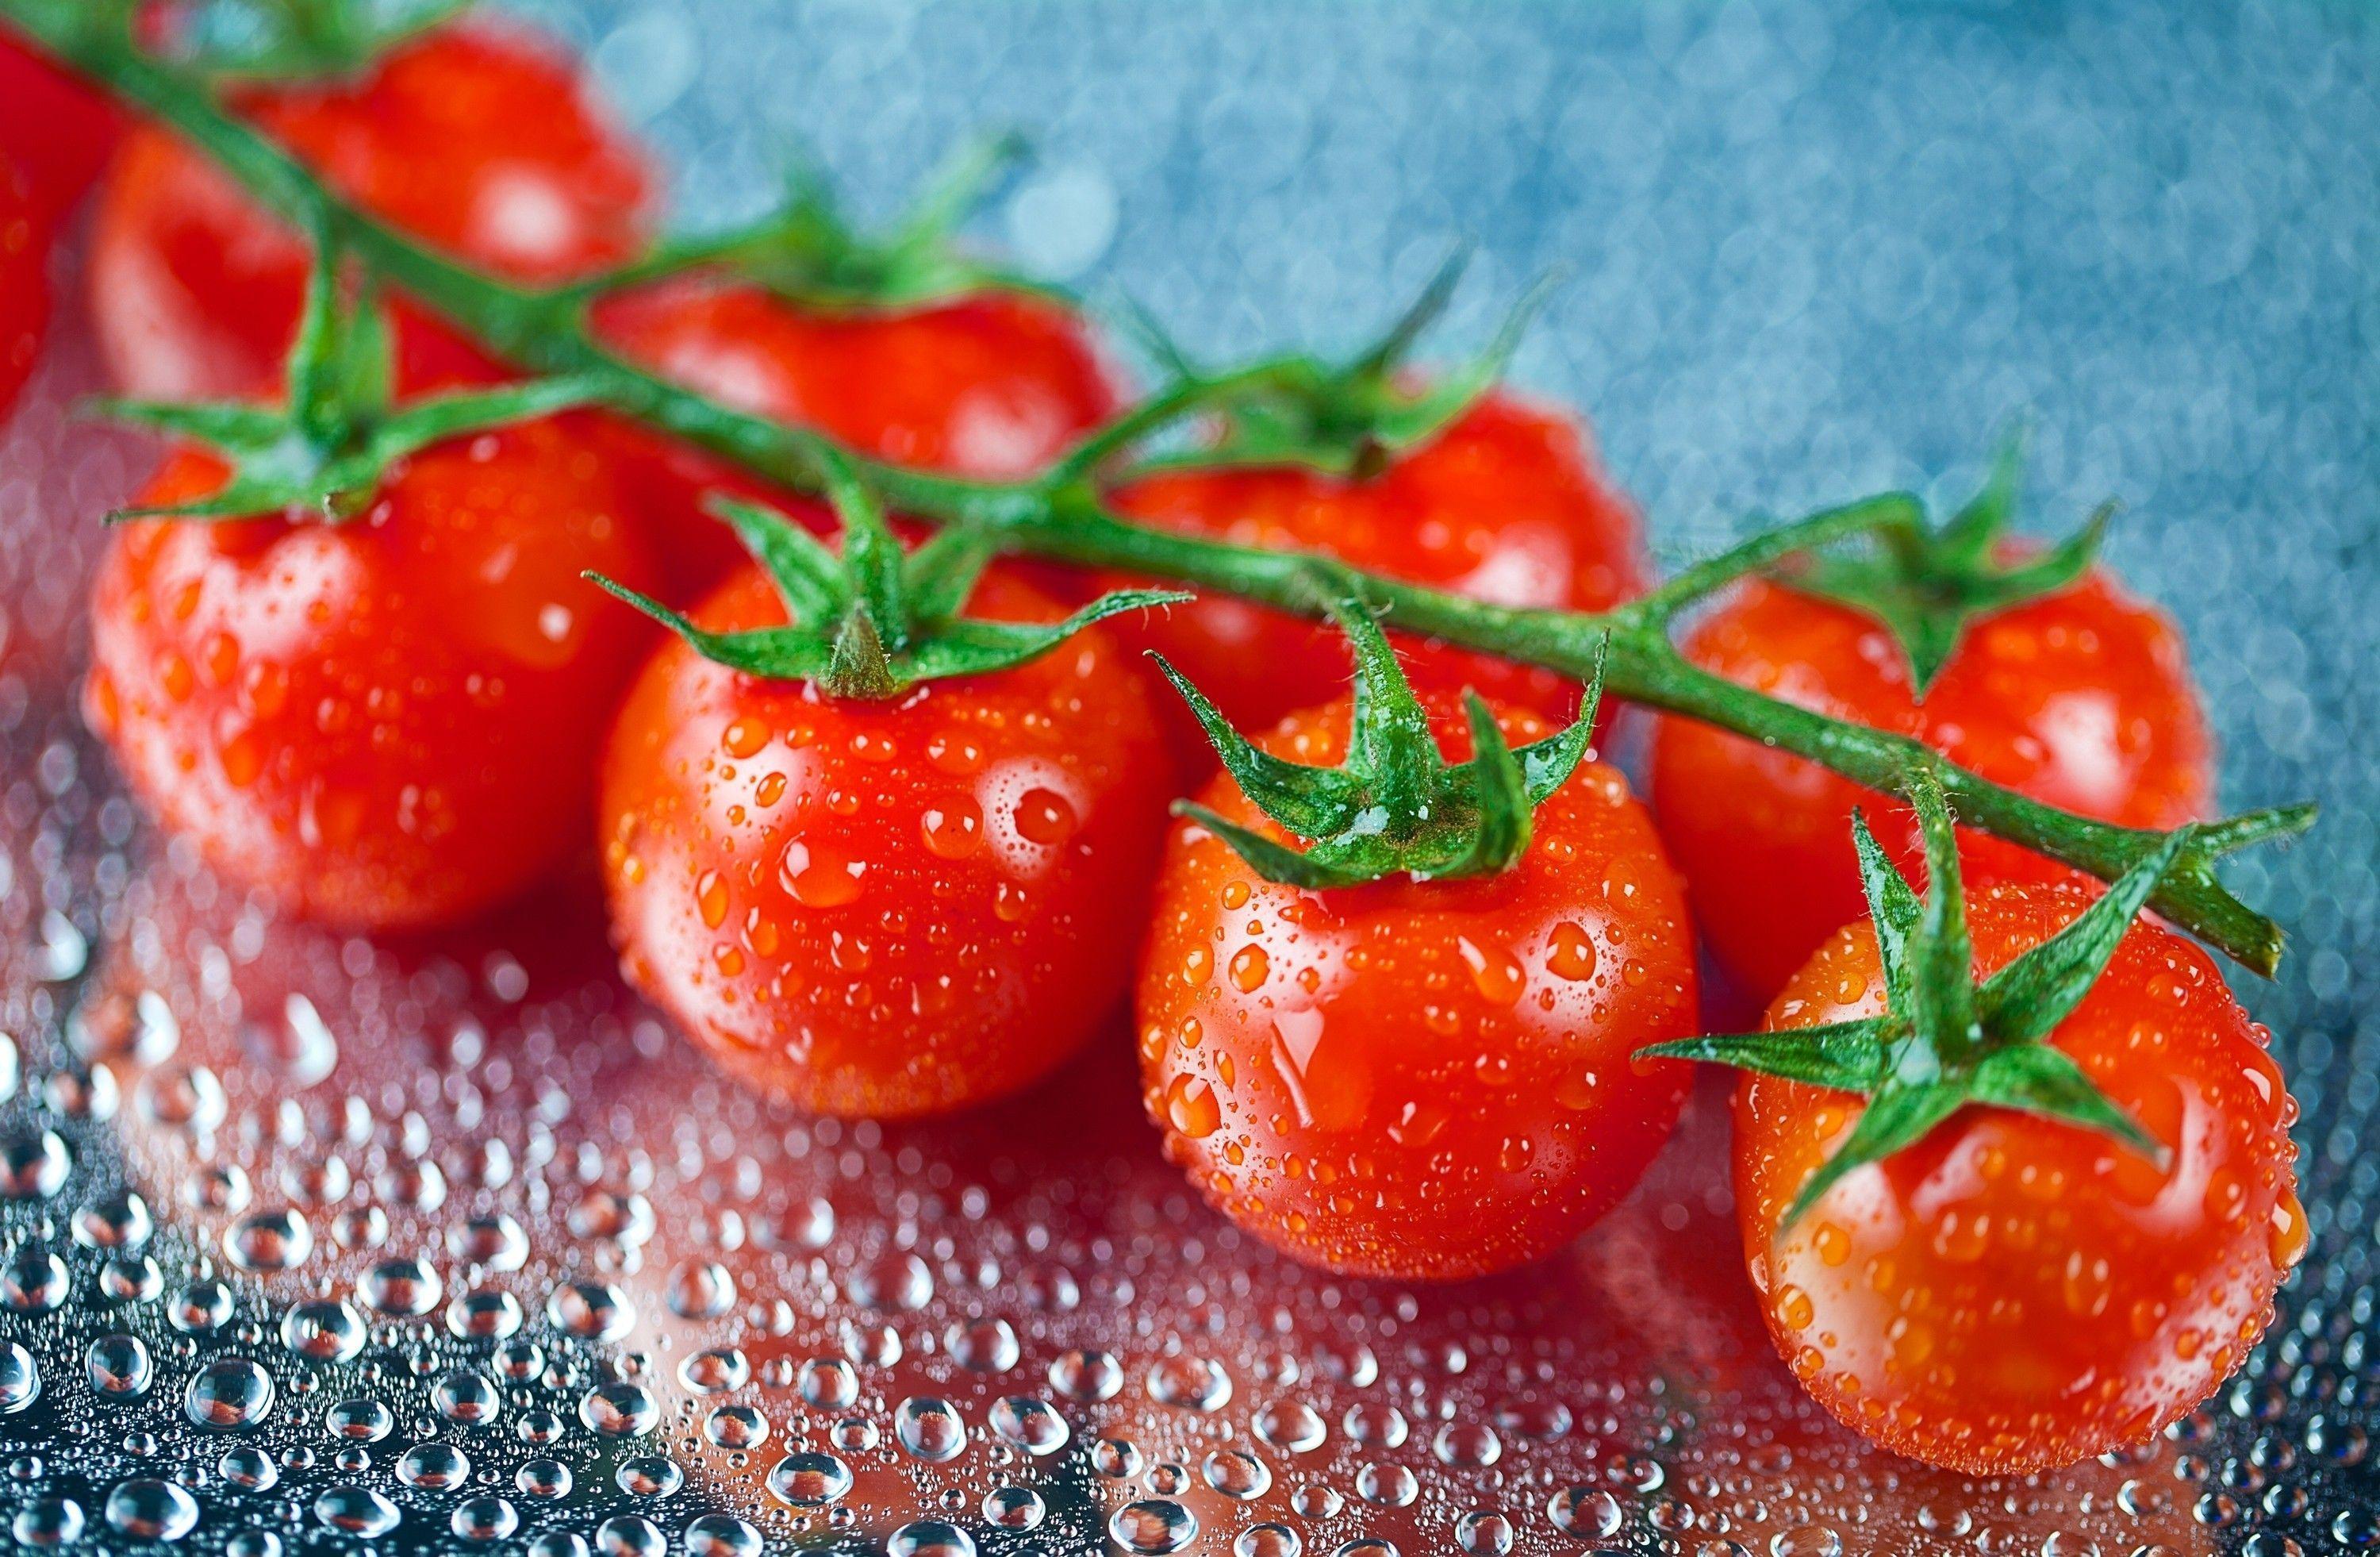 Tomato HD Wallpaper and Background Image